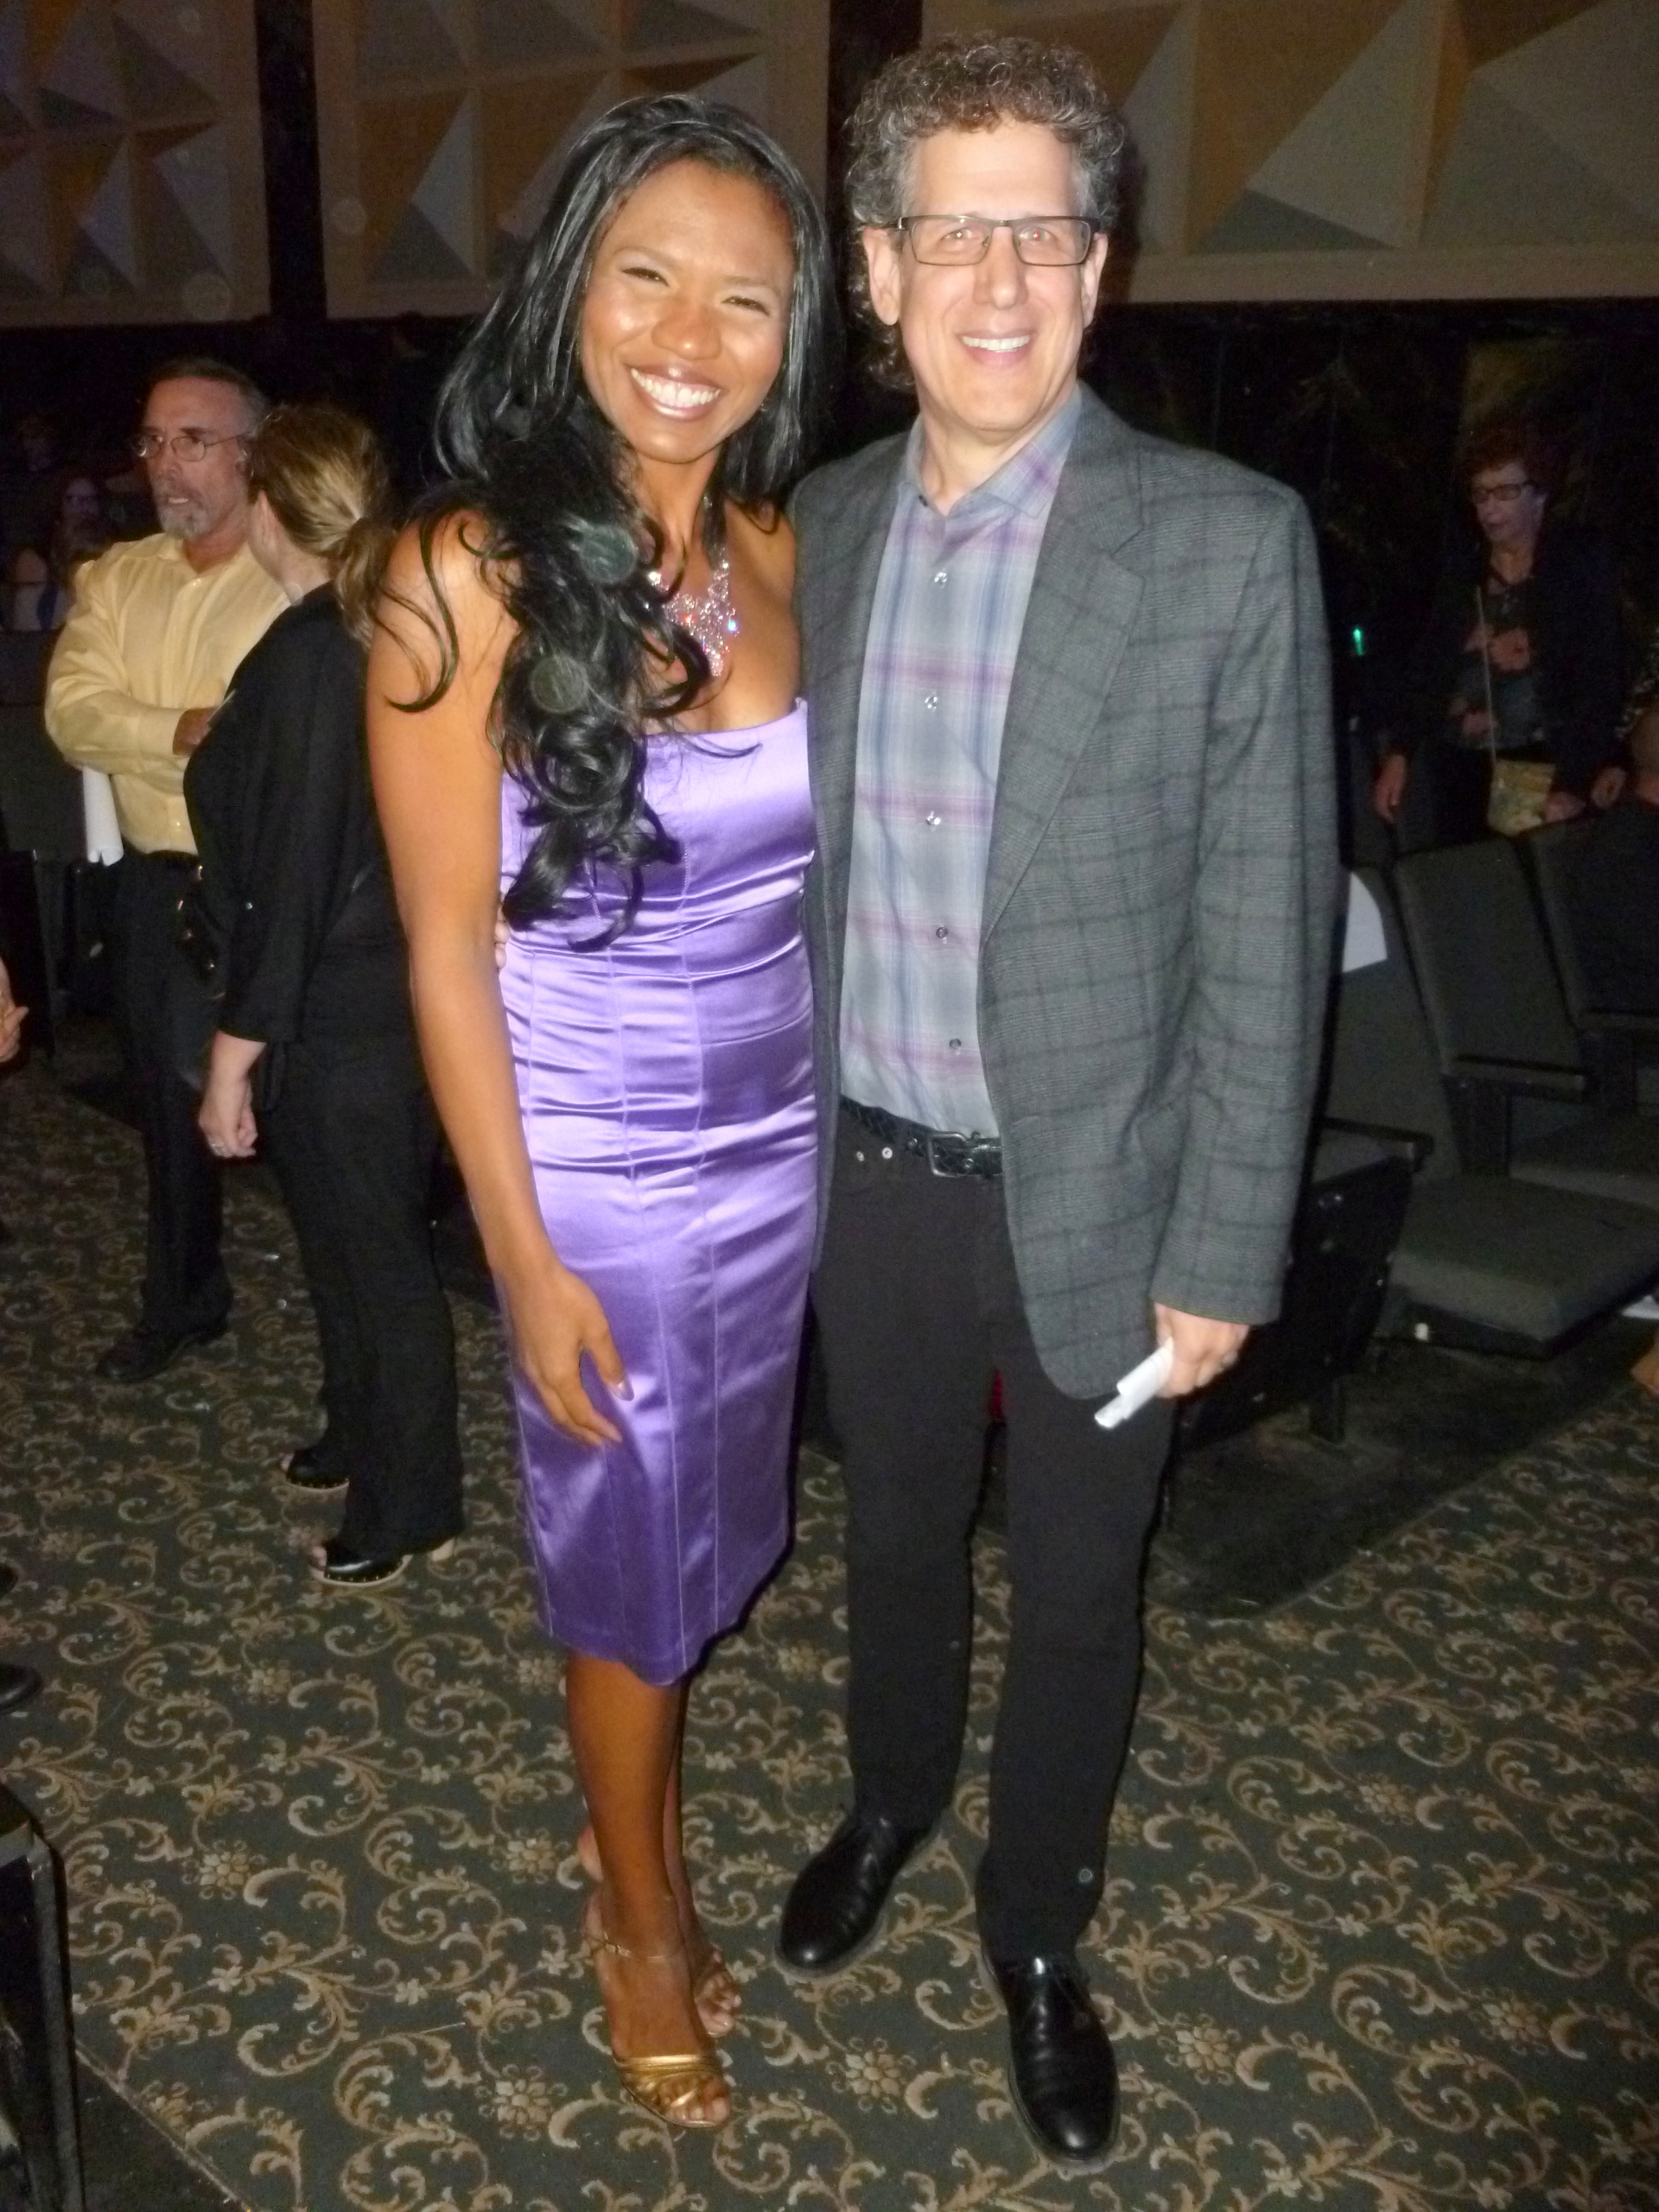 Olympia LePoint and Movie & TV Producer Jim Berk, CEO of Participant Media, at the Alexander Hamilton Music Academy 25 Year Reunion. As the principal, Jim Berk carved the way for Olympia LePoint to become an Award-Winning Rocket Scientist.